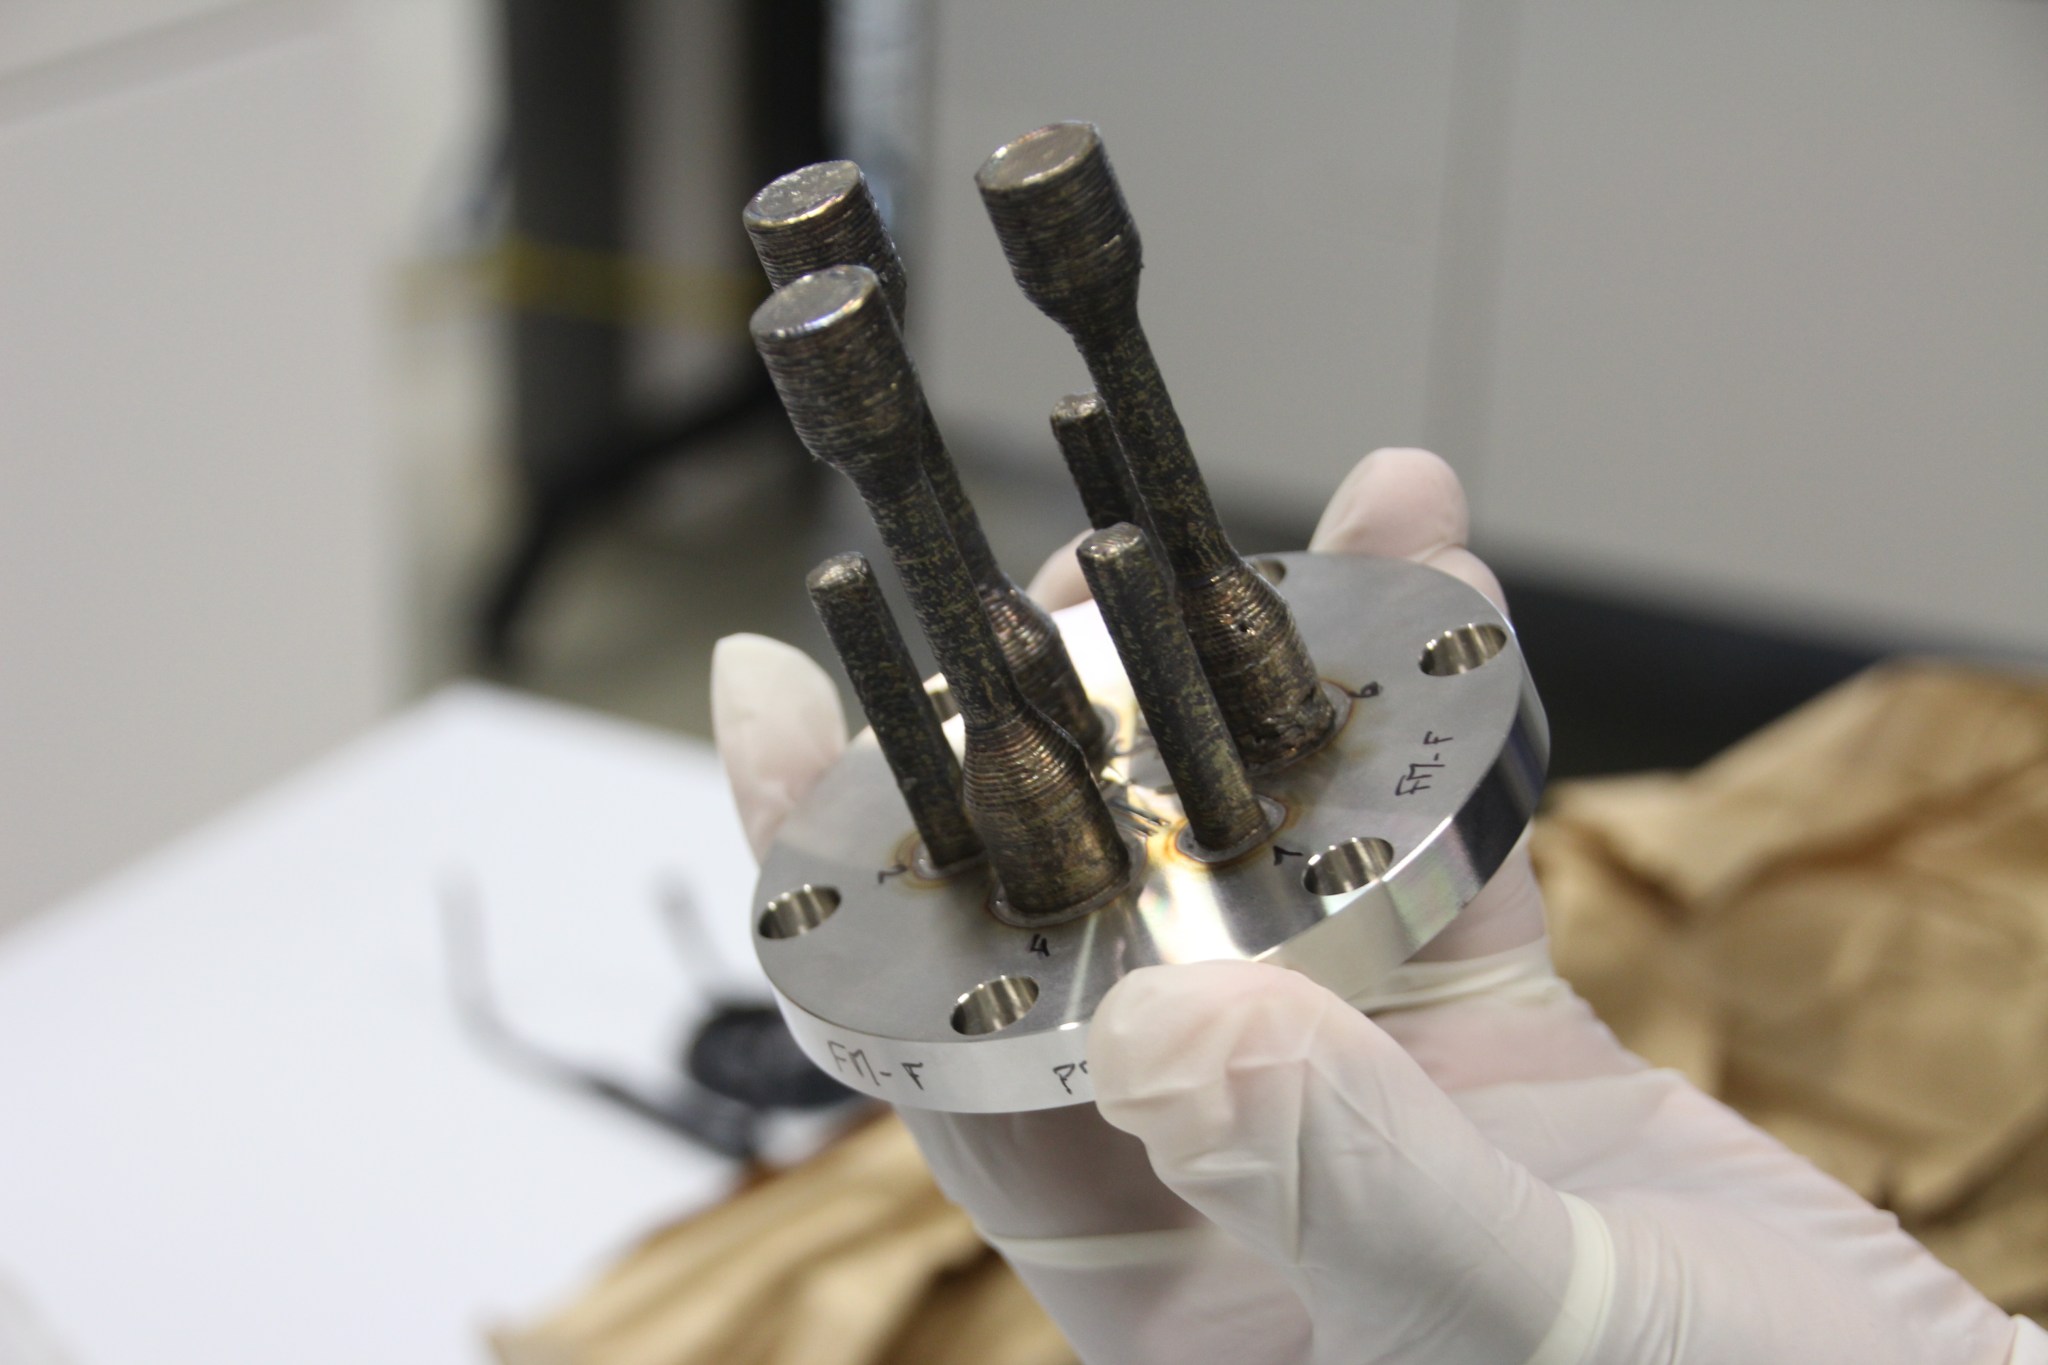 Samples produced by the Metal 3D Printer prior to launch to the space station.